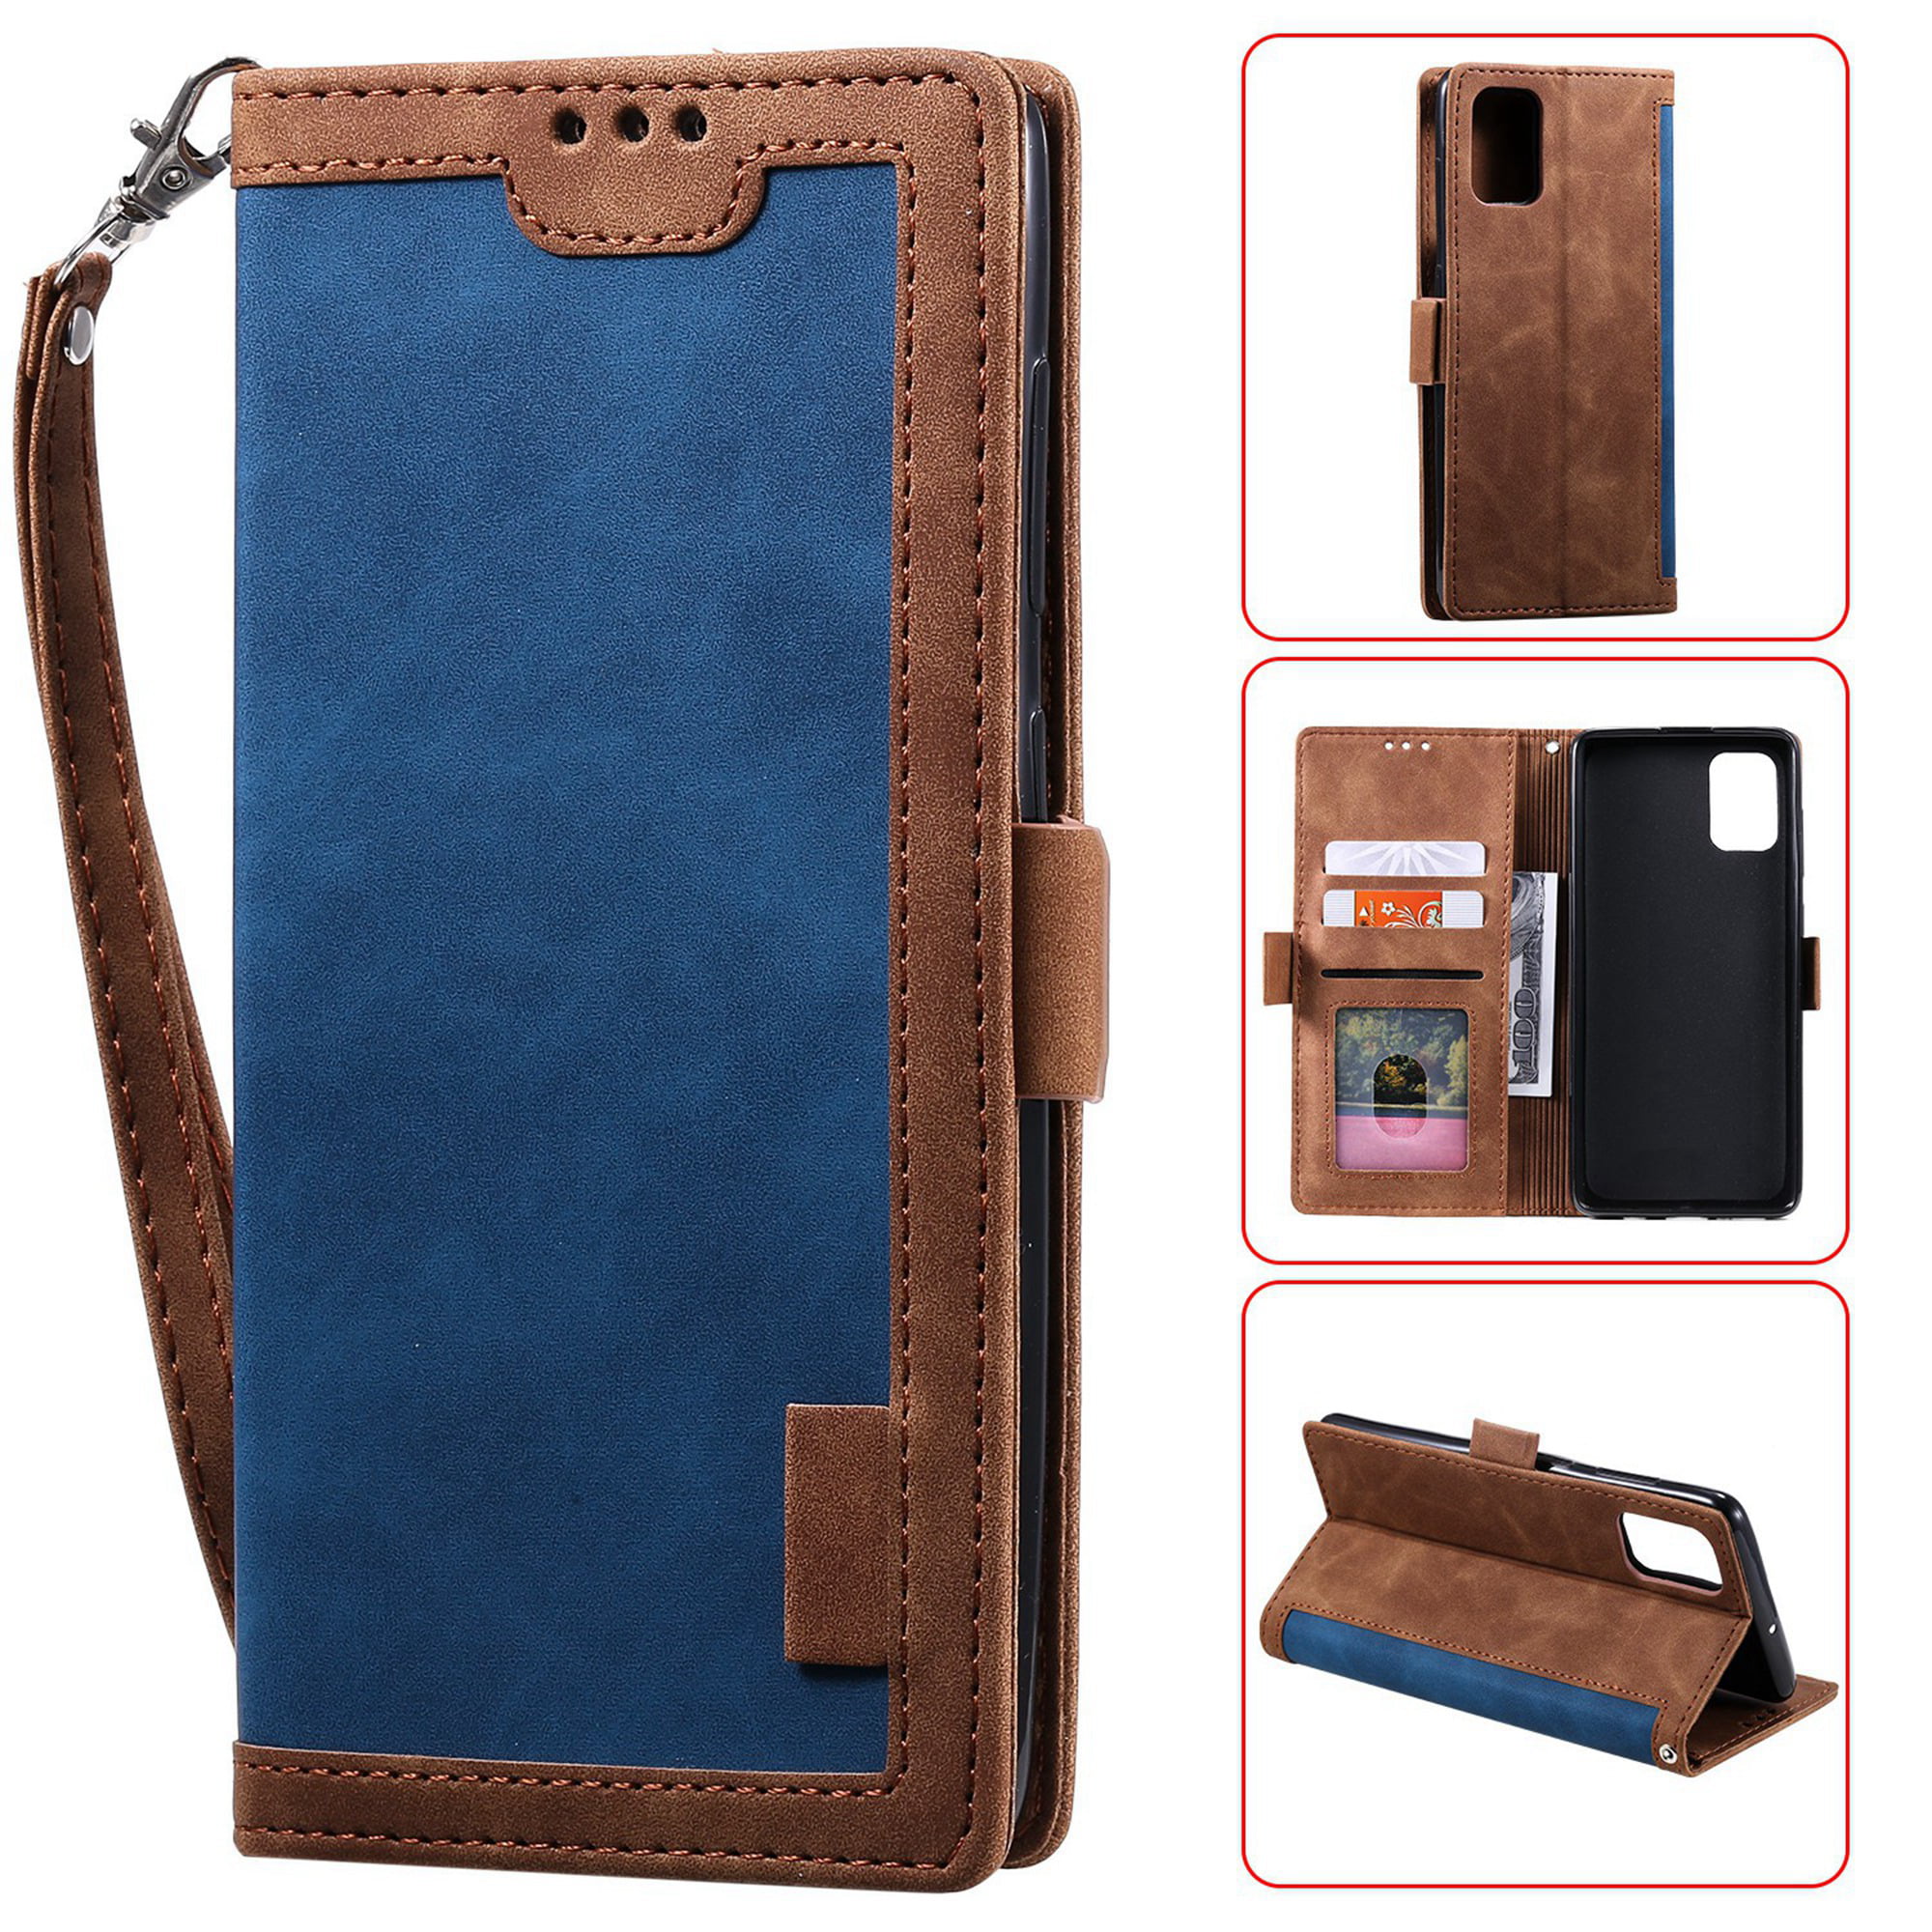 Dteck Retro Wallet Case For Samsung Galaxy A71 4G (6.7 inches),Magnetic ...